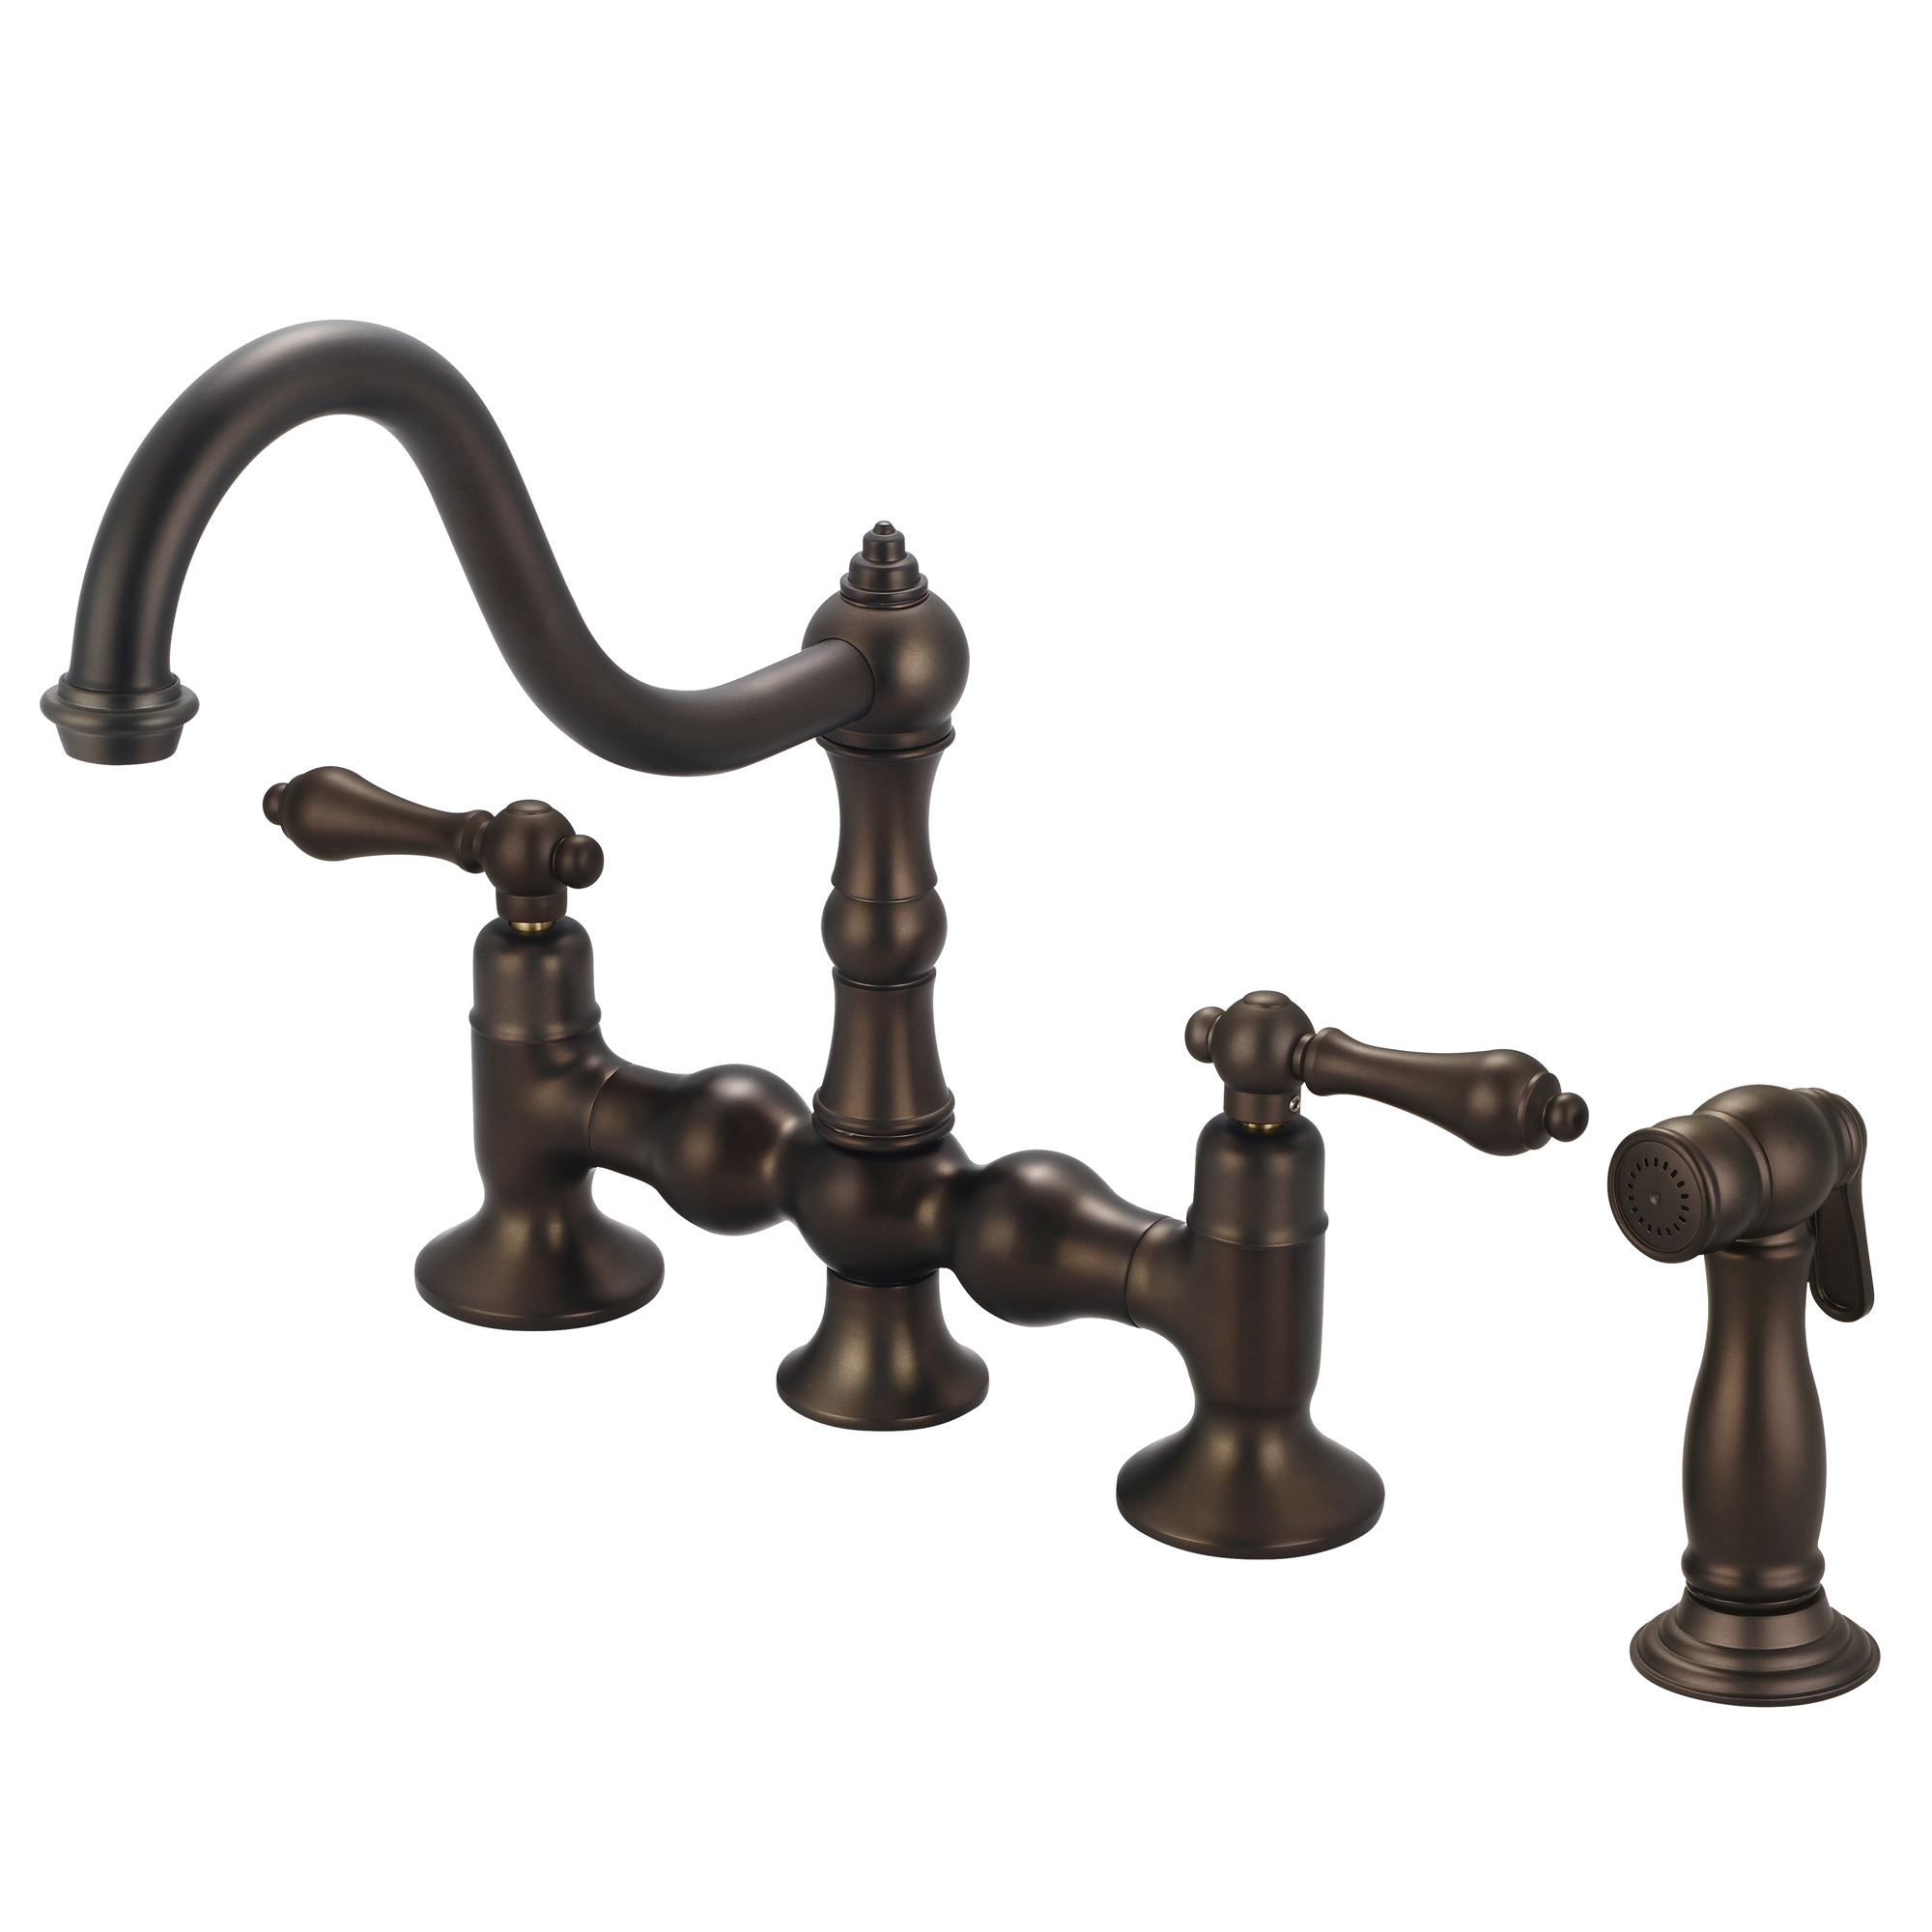 Bridge Style Kitchen Faucet With Side Spray To Match in Oil-rubbed Bronze Finish With Metal Lever Handles Without Labels